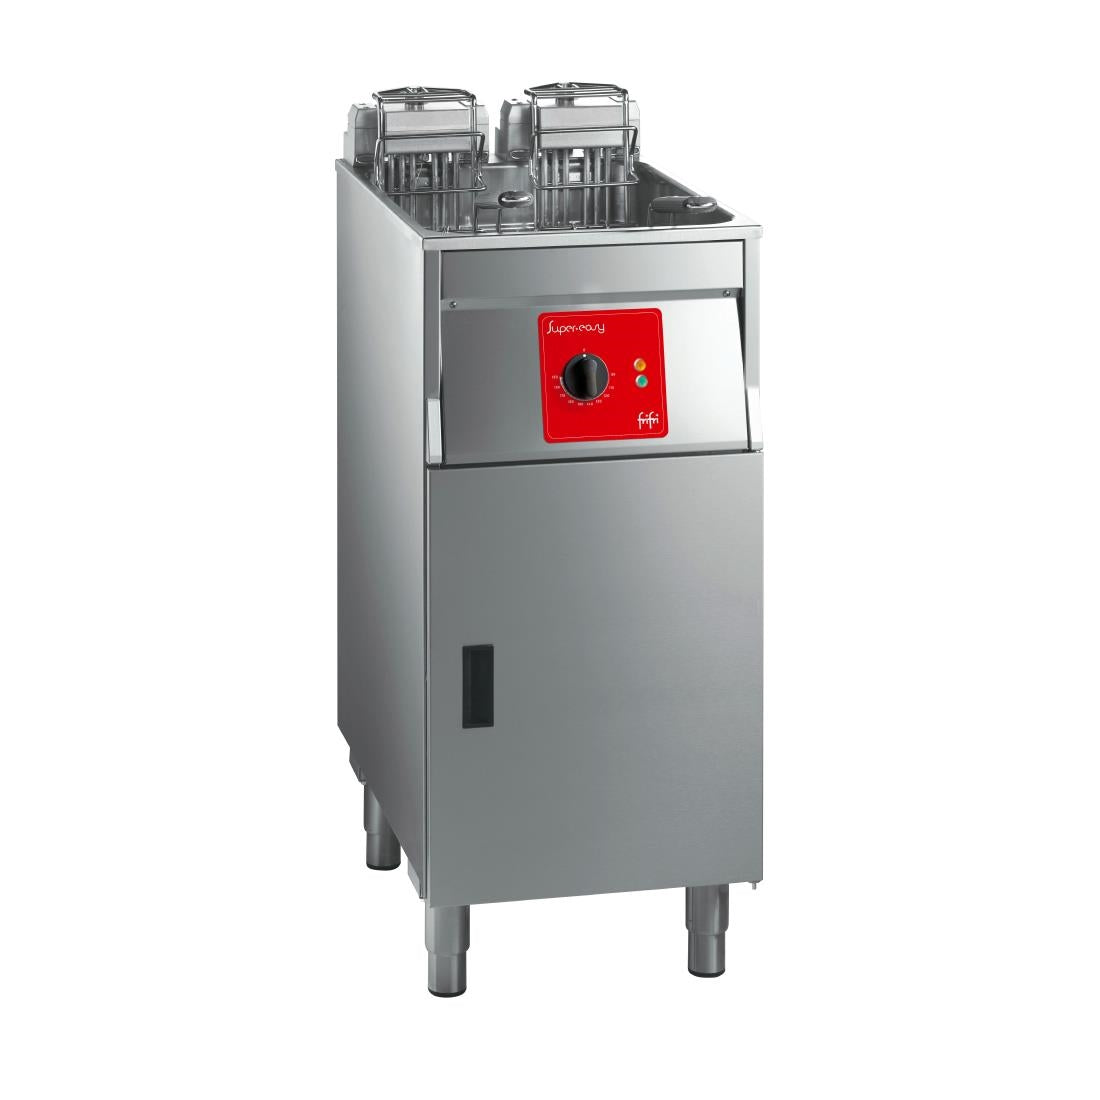 HS061-3PH FriFri Super Easy 412 Electric Free-Standing Single Tank Fryer without Filtration 2 Baskets 22kW - Three Phase